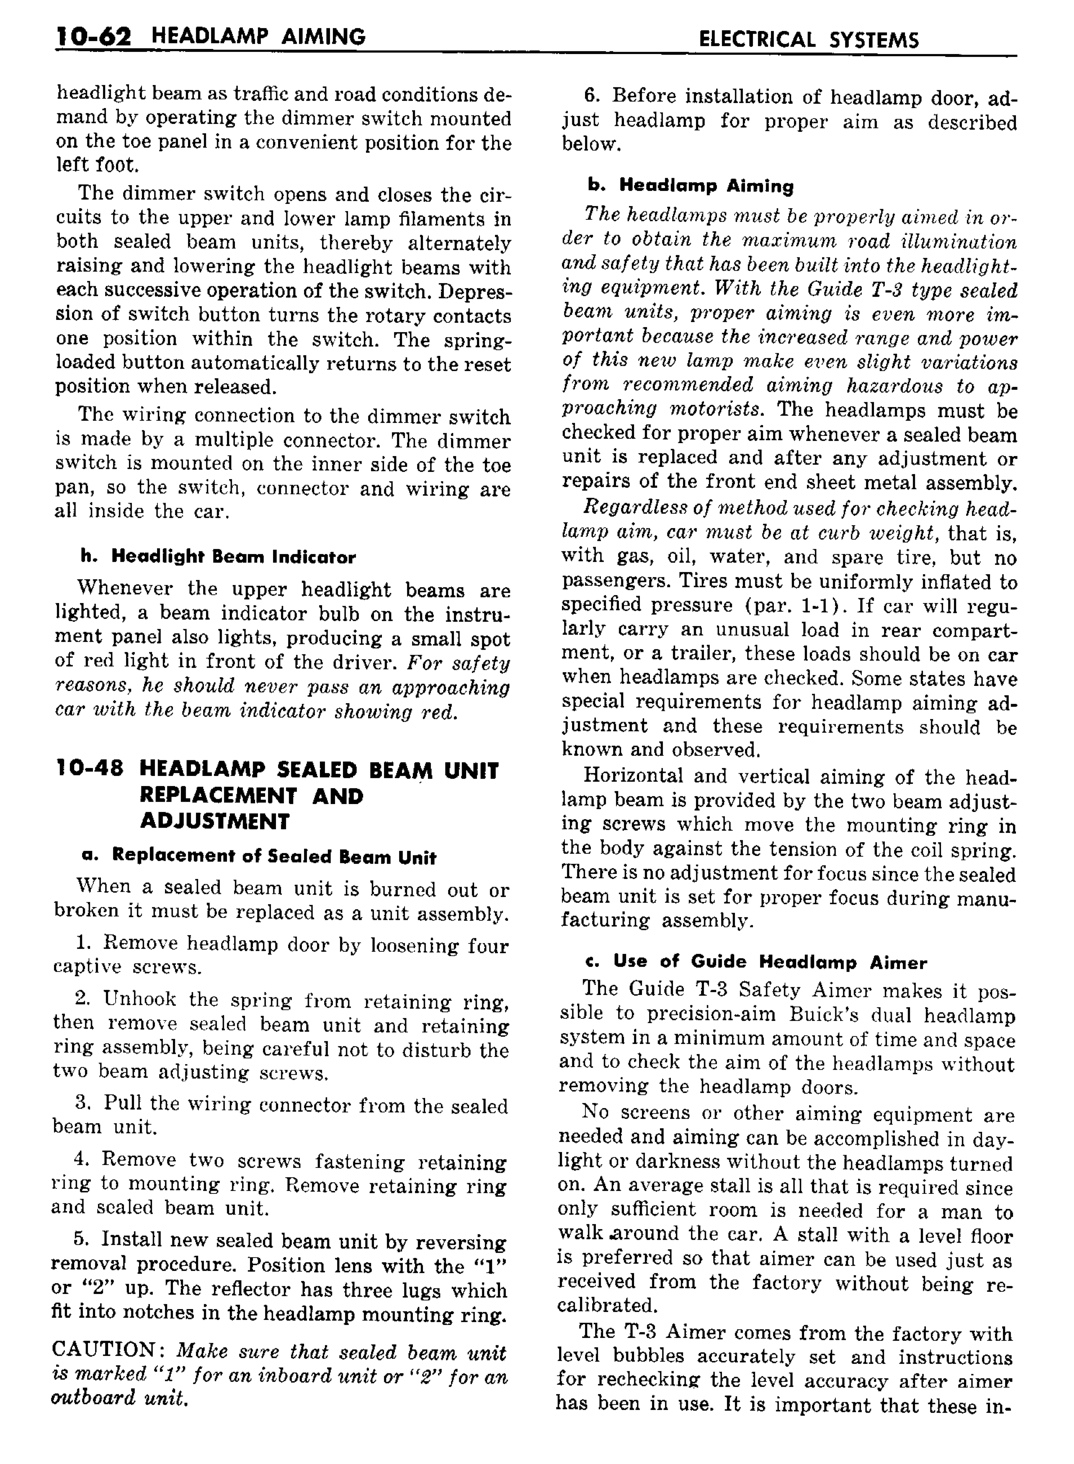 n_11 1960 Buick Shop Manual - Electrical Systems-062-062.jpg